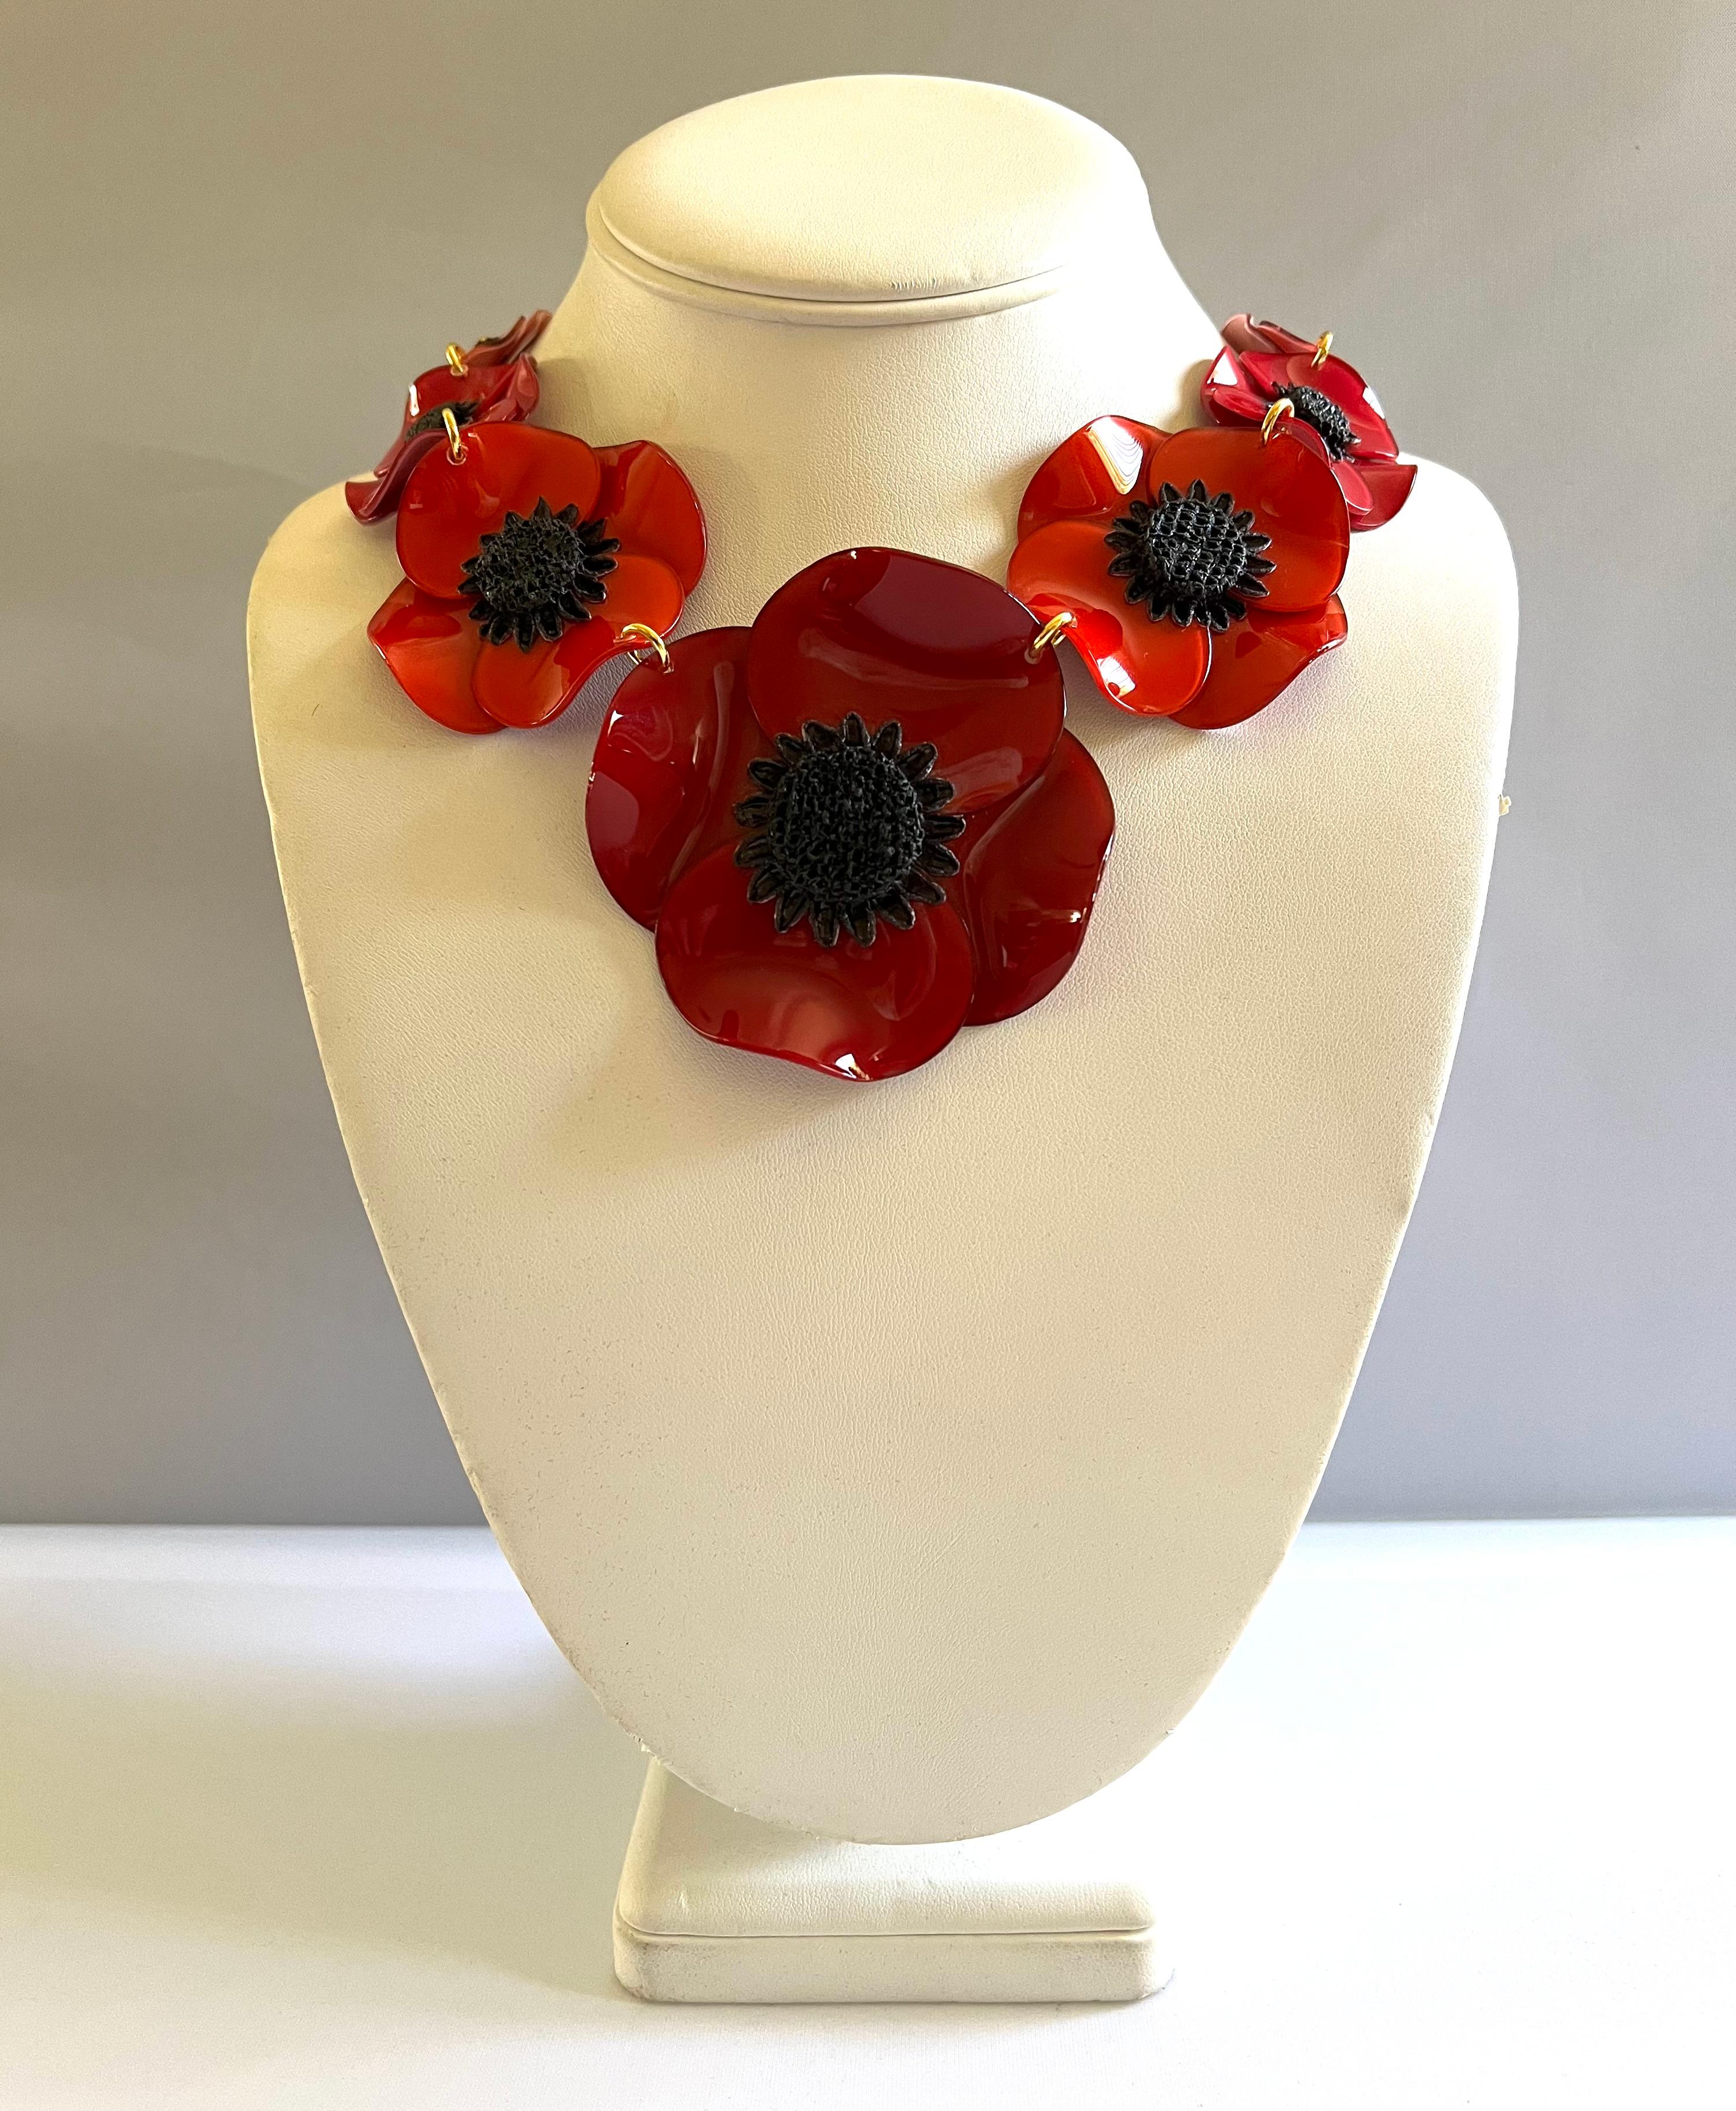 Light and easy to wear, the contemporary handmade adjustable artisanal necklace was made in Paris by Cilea. The statement necklace features seven three-dimensional enameline (enamel and resin composite) poppy flowers in red and pink. The poppies